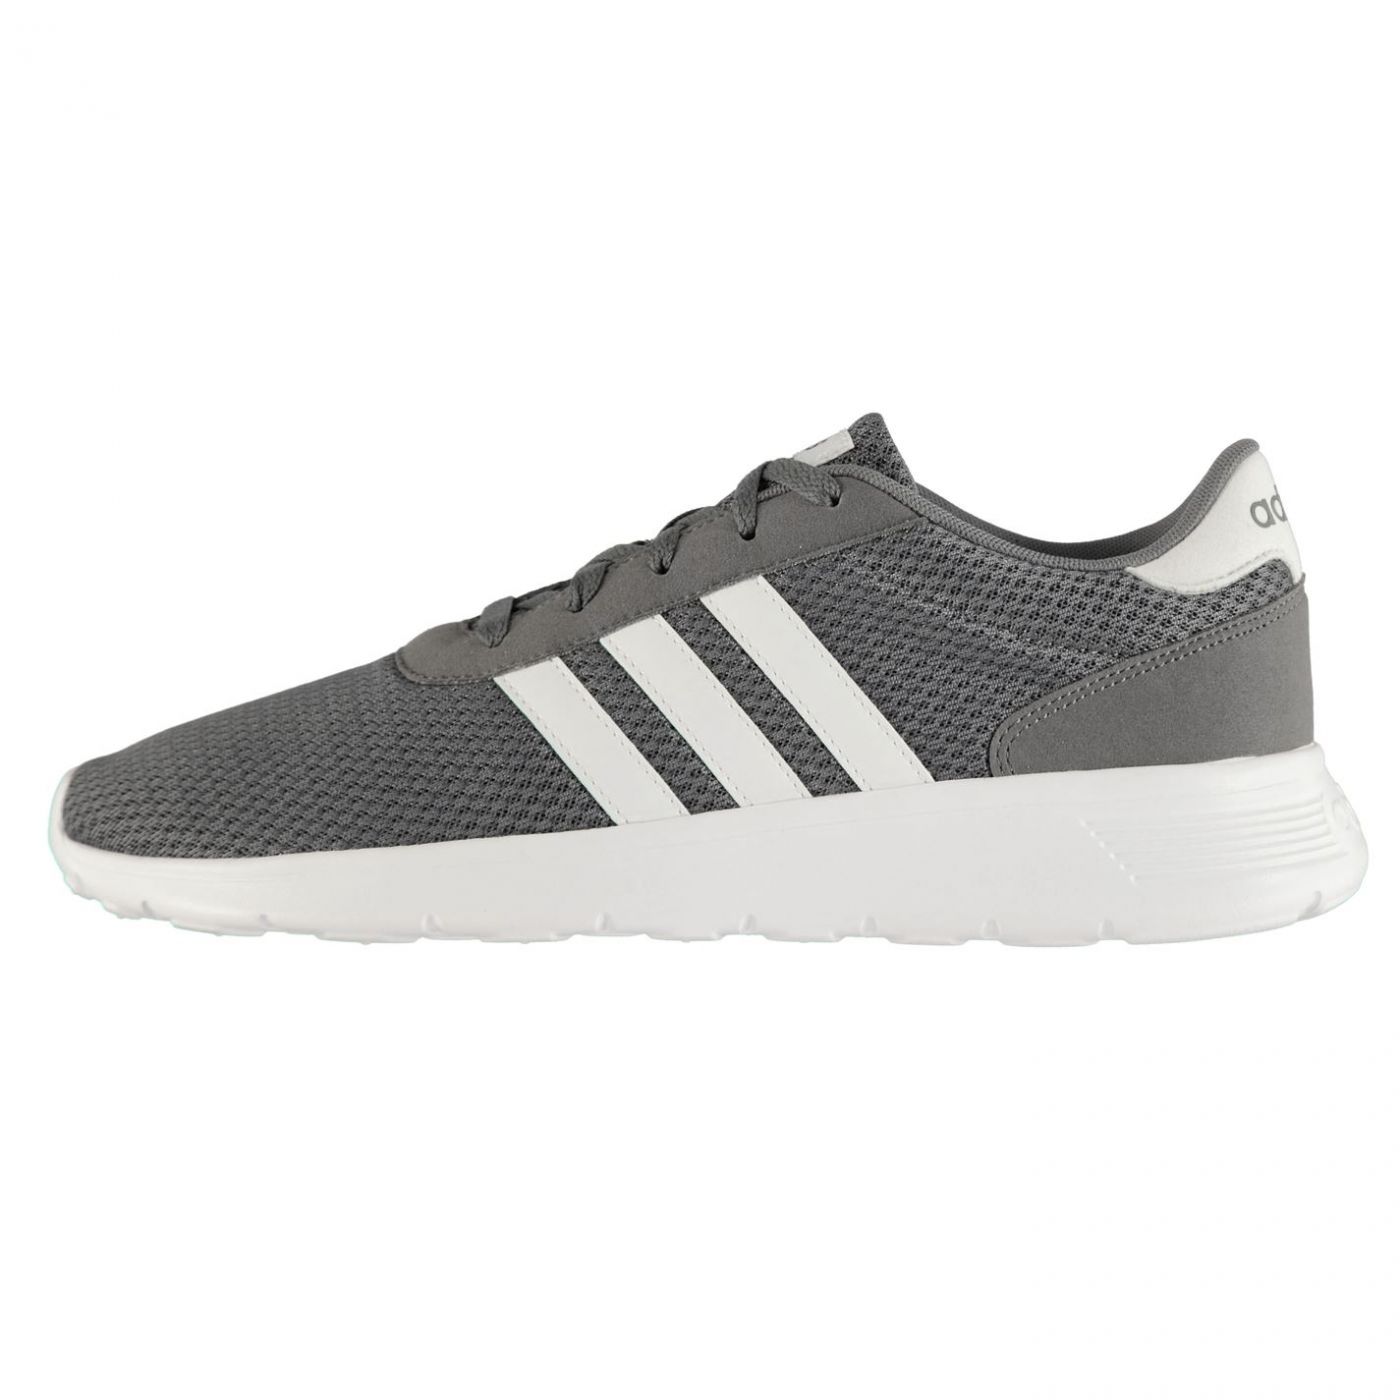 Adidas Lite Racer Mens Trainers